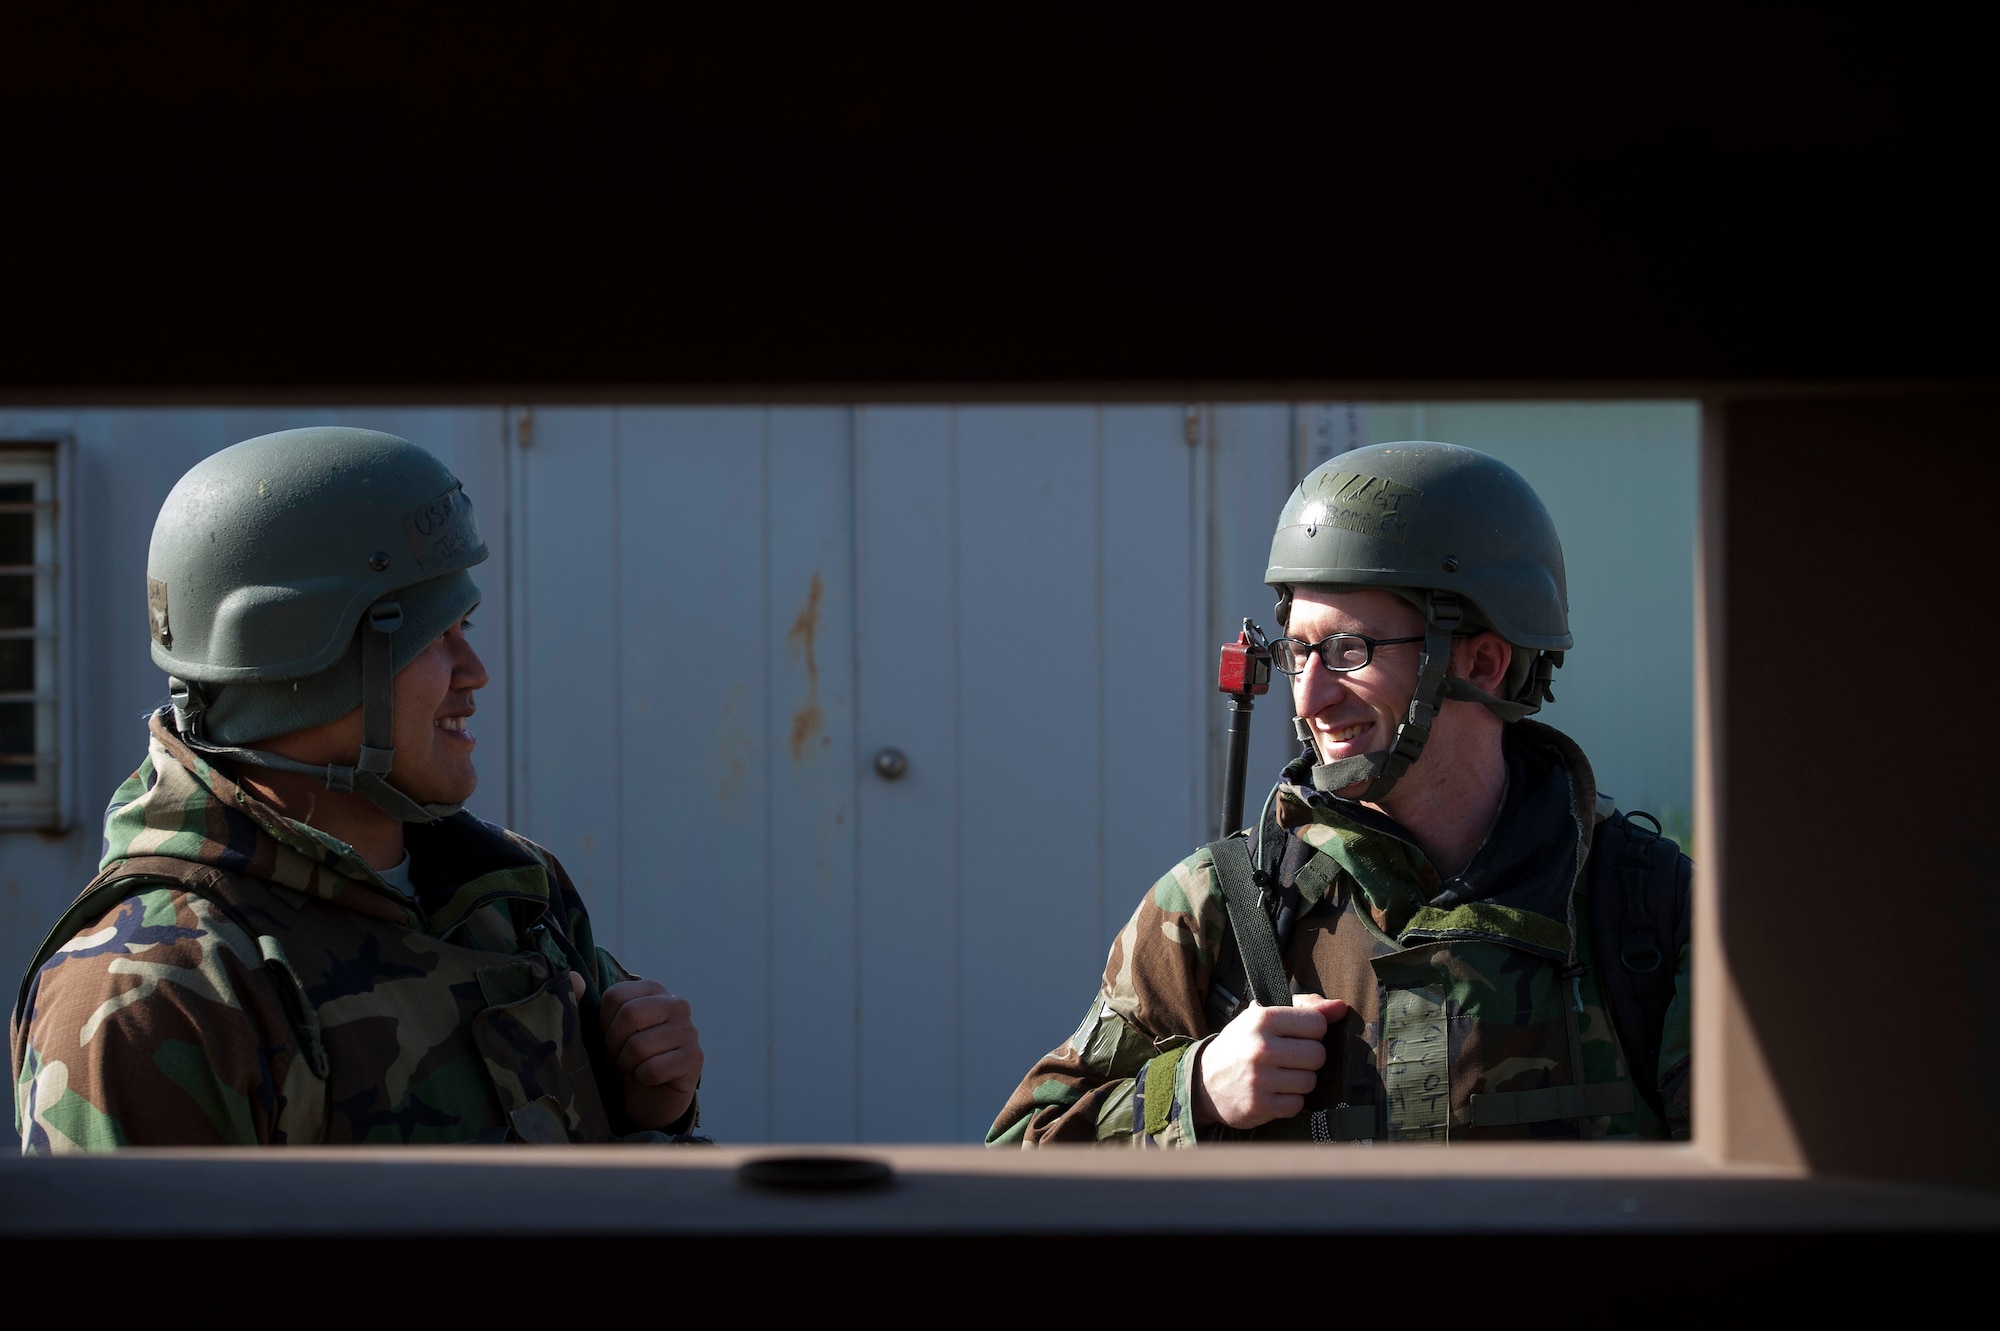 Senior Airman Jesse Oeur, 8th Security Forces Squadron response force member, and Staff Sgt. Scott Trembley, 8th SFS response force leader, share a laugh as they discuss mission tactics during Exercise Beverly Midnight 16-3 at Kunsan Air Base, Republic of Korea, May 4, 2016. The exercise focused on readiness--testing Kunsan’s wartime procedures by realistically looking at the ability to defend the base, execute operations and sustain follow-on forces. (U.S. Air Force photo by Staff Sgt. Nick Wilson/Released)